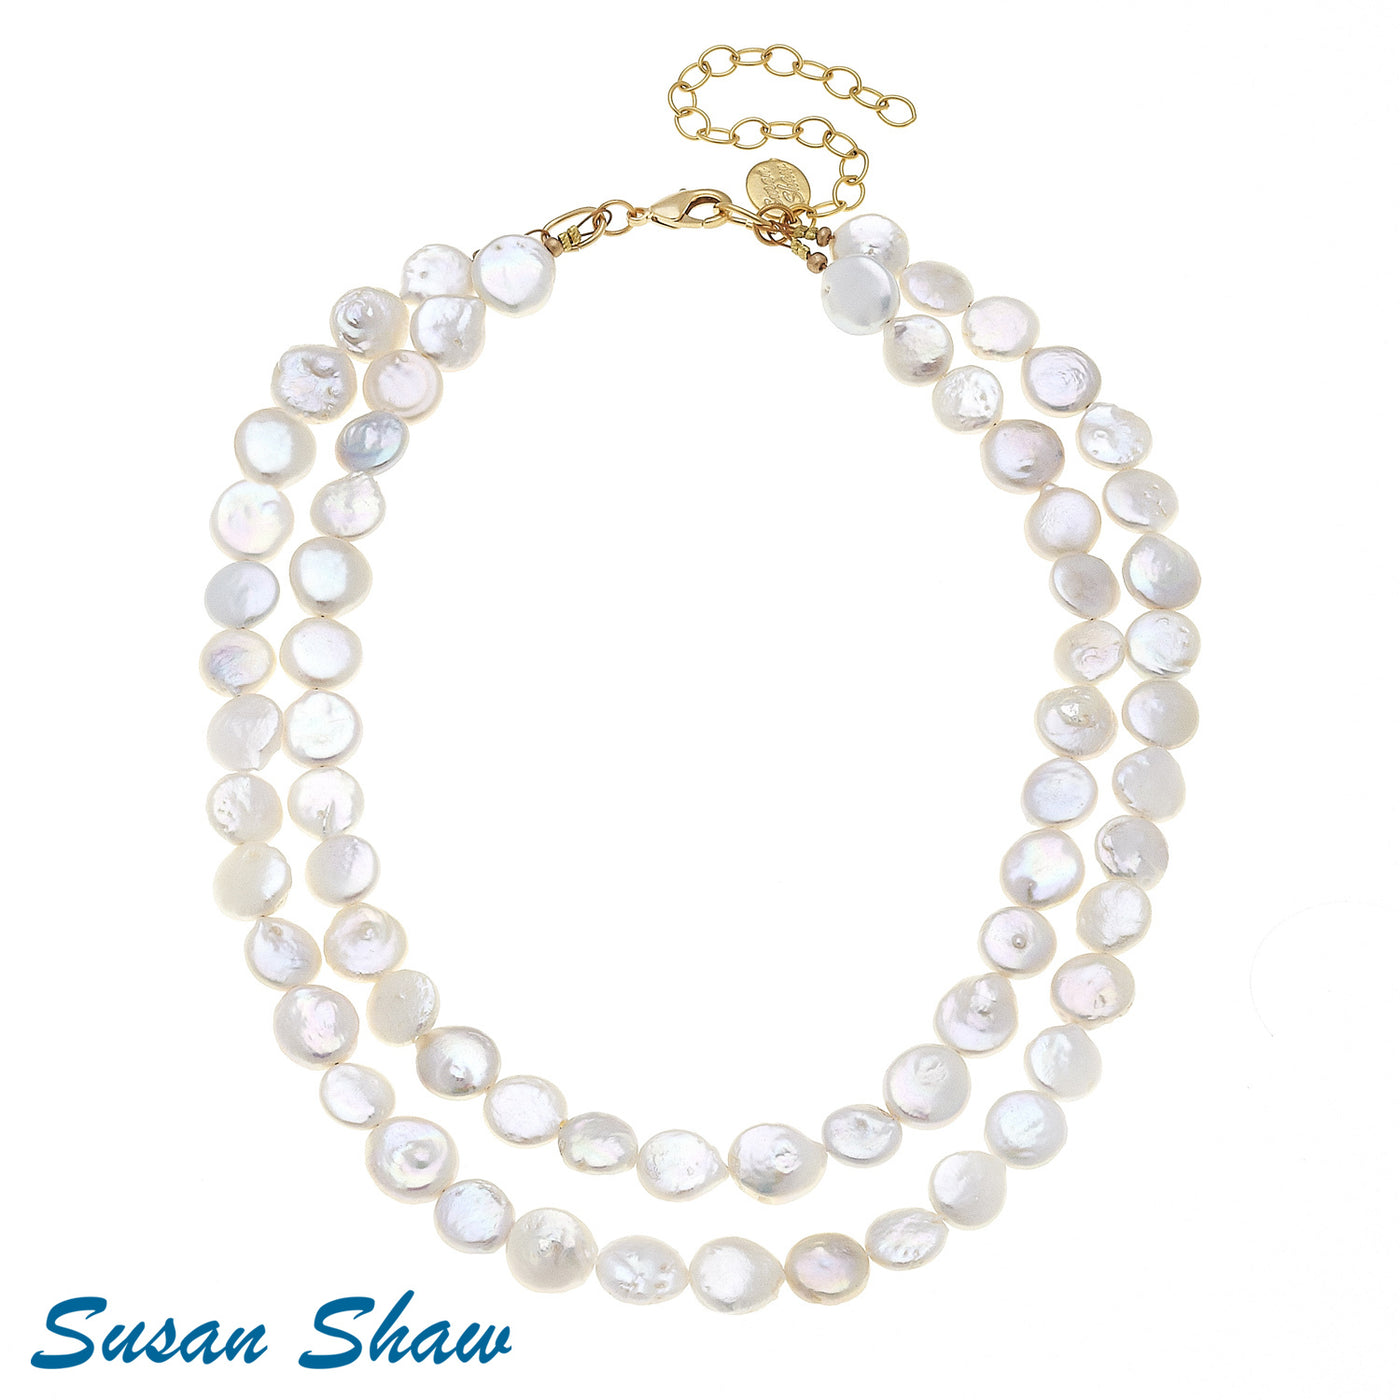 Double Strand Coin Pearl Necklace - Susan Shaw